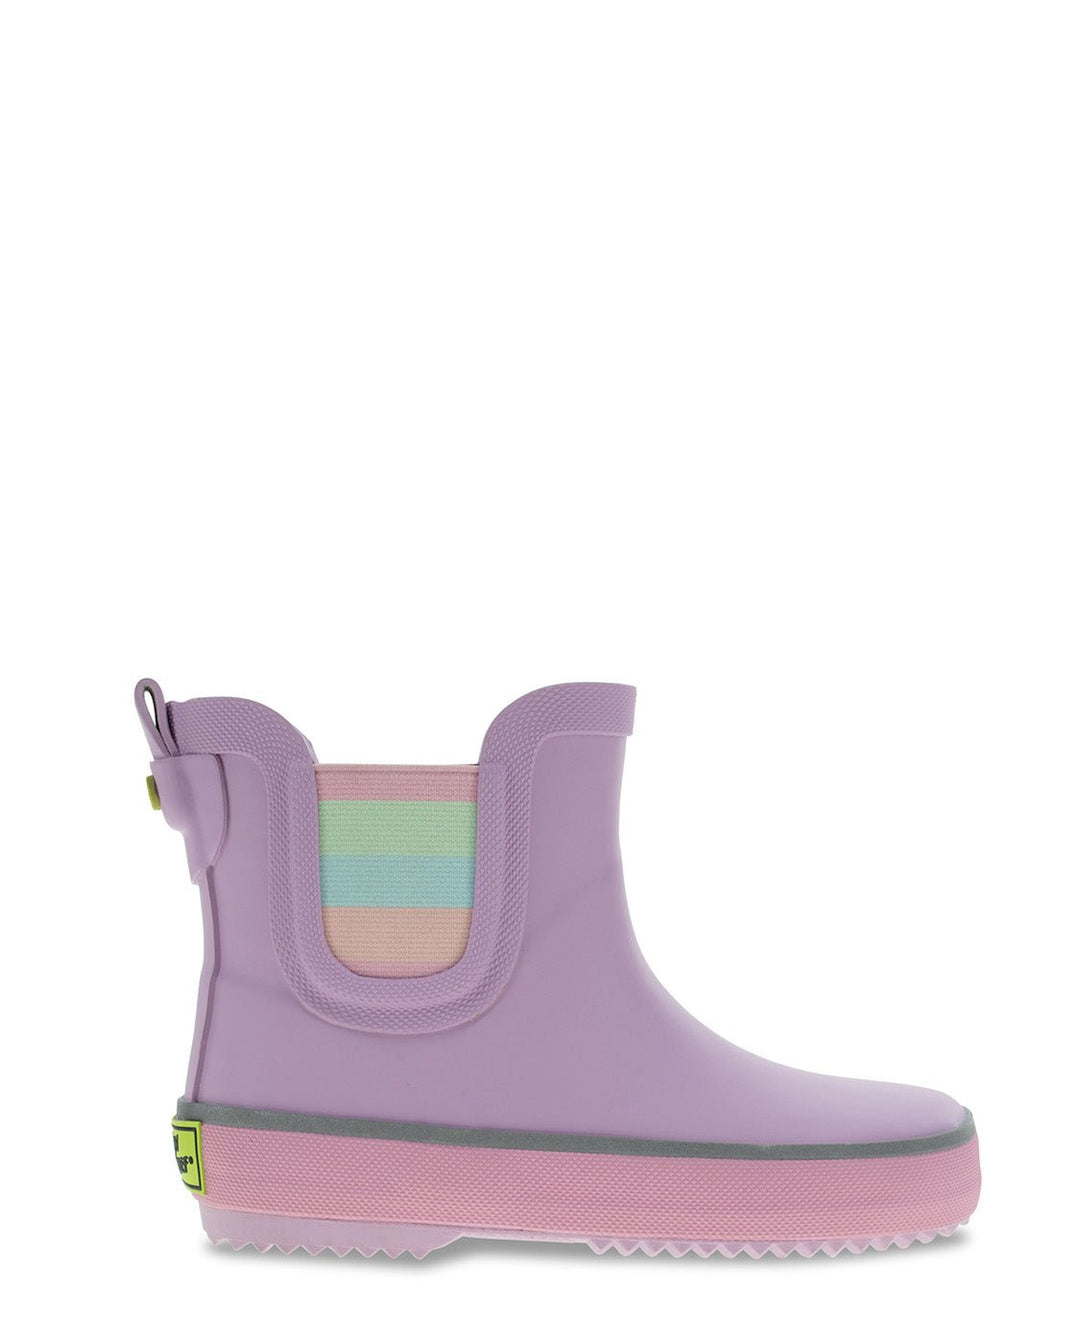 New! Kids Element Chelsea Rain Boot - Lilac - Western Chief